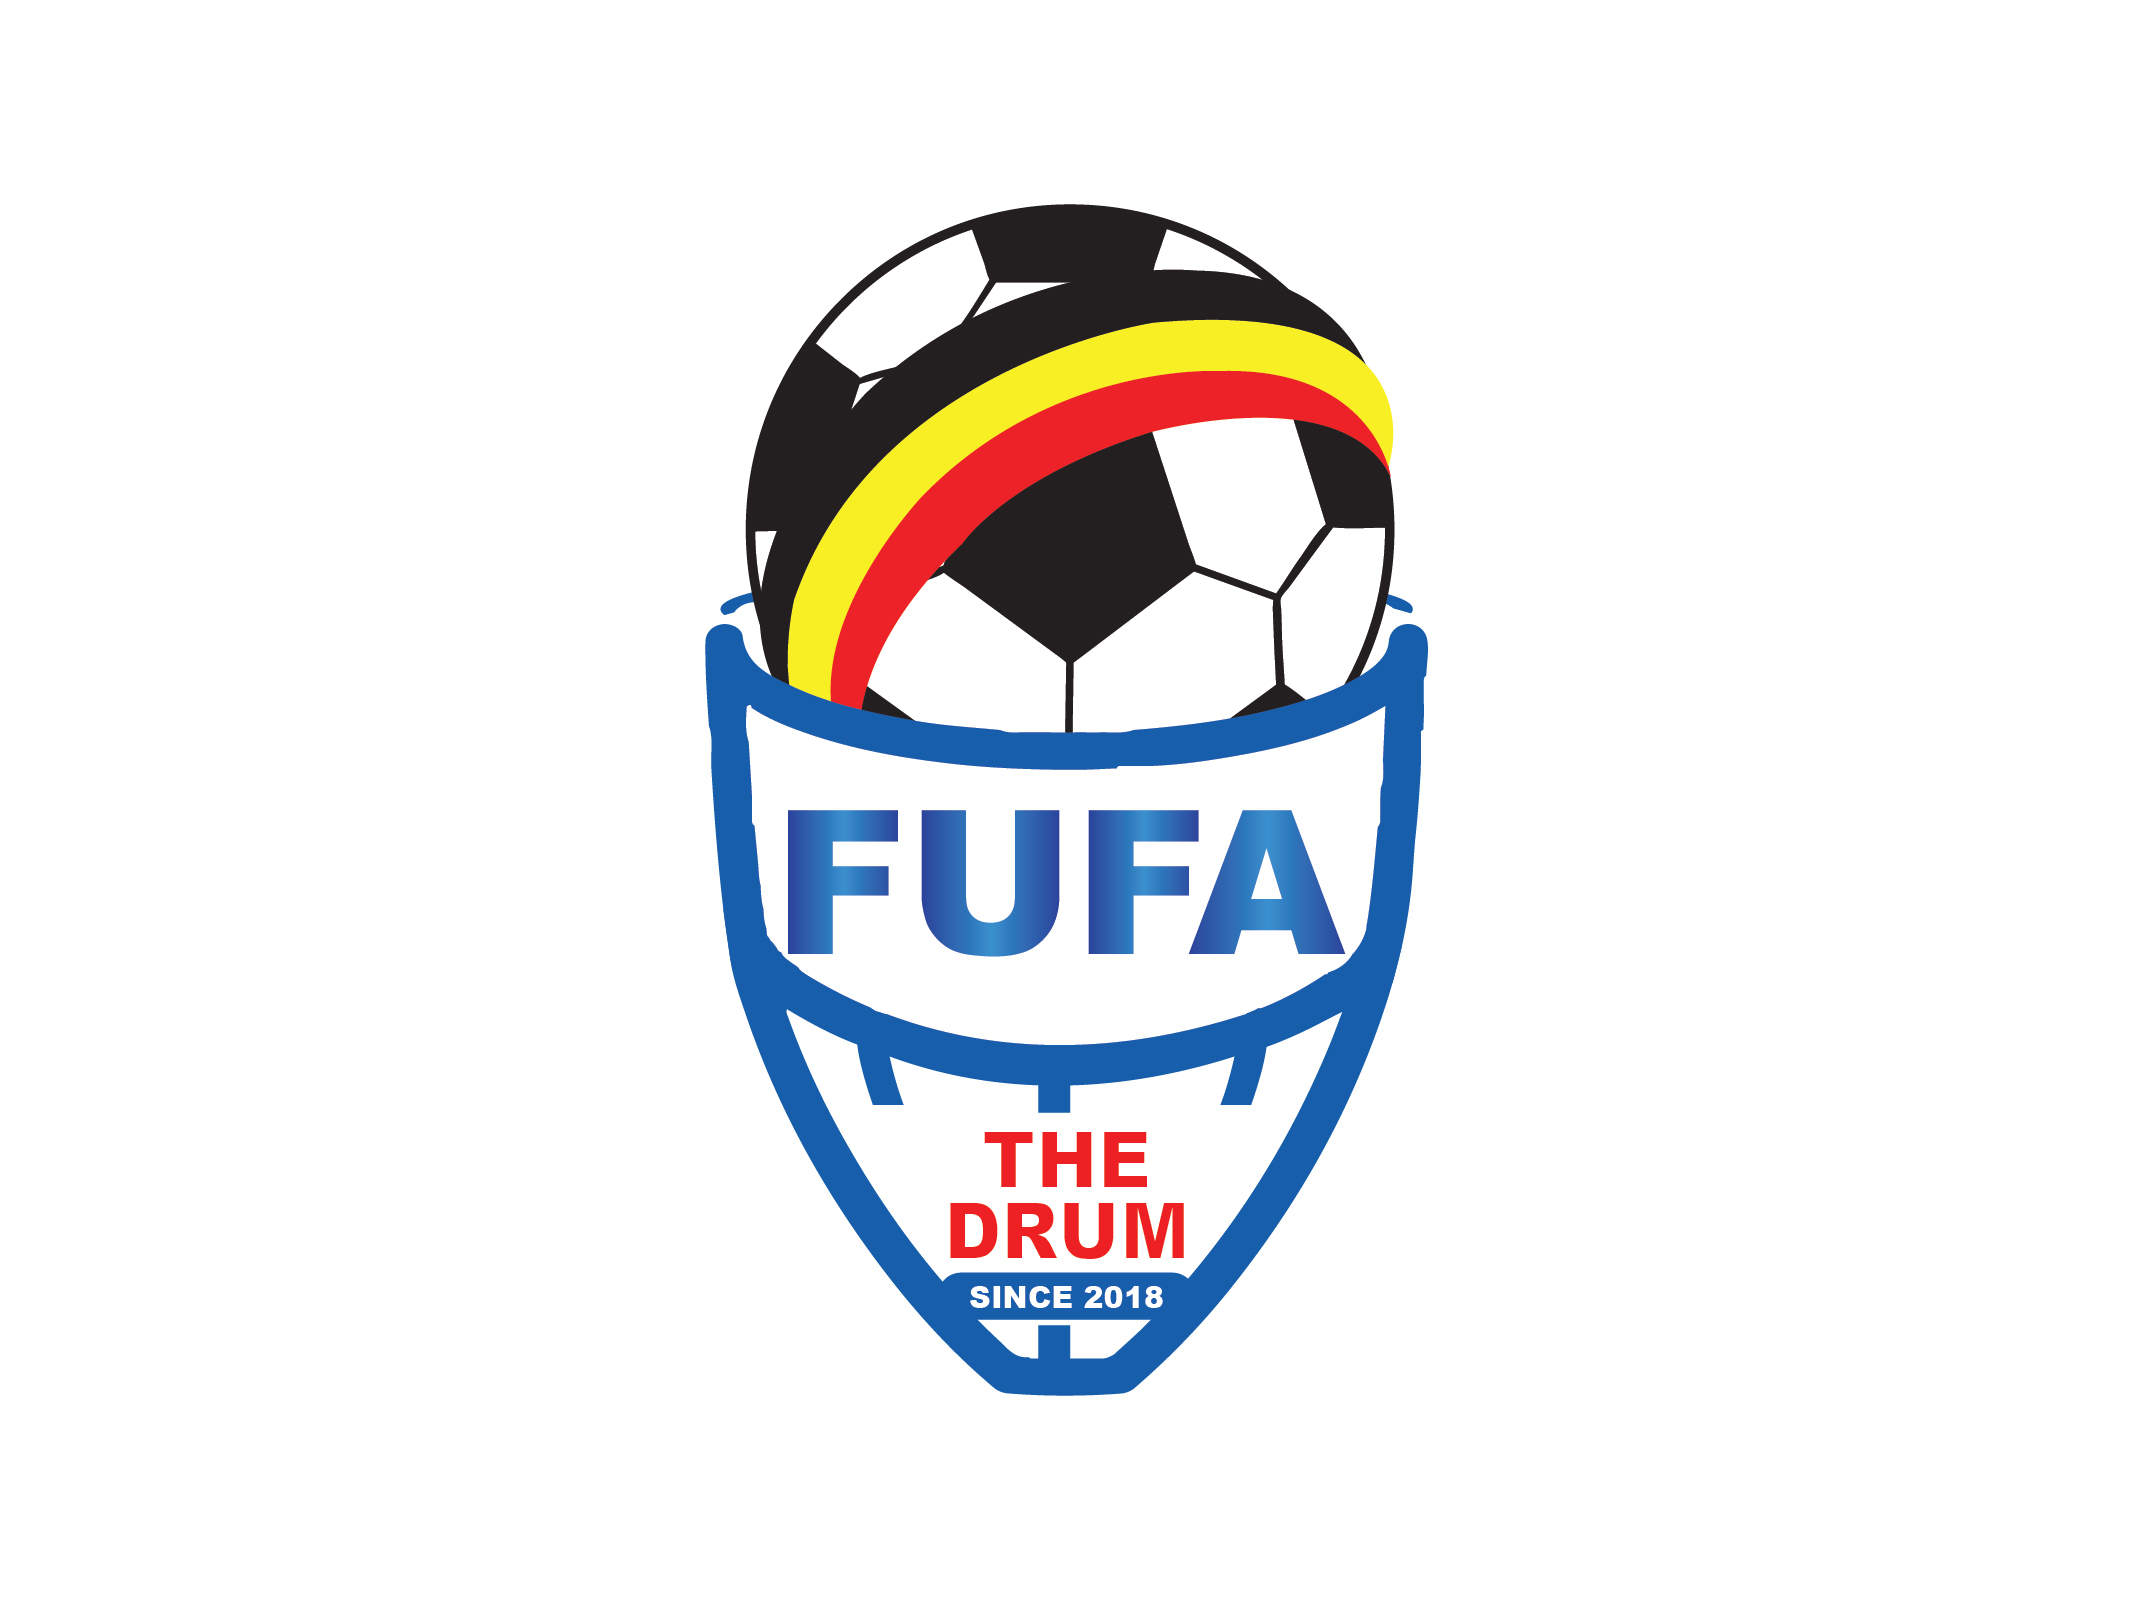 The FUFA Drum: All Match Day 2 fixtures to be played on 18th March